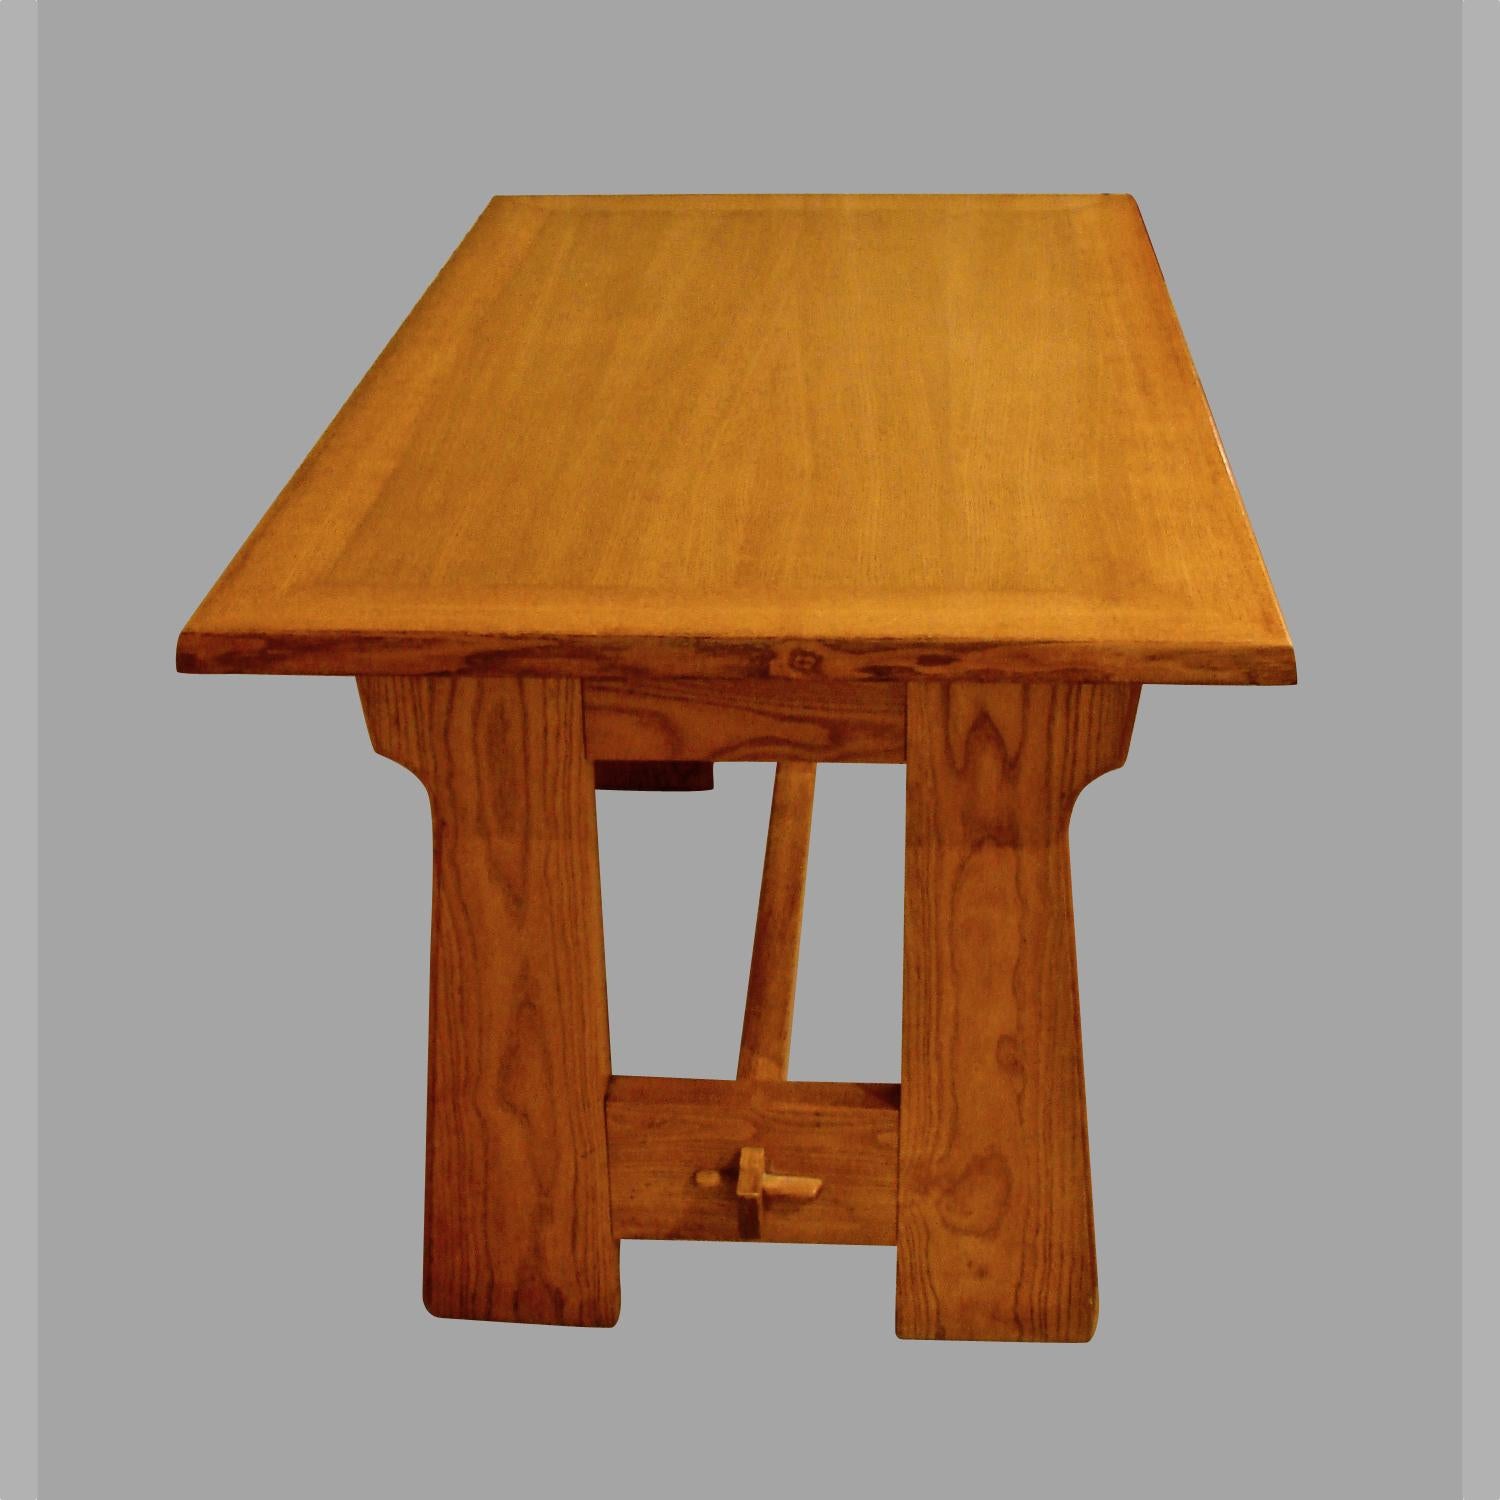 A well-made northern European light oak work or dining table with two frieze drawers, the molded legs connected by an H stretcher with mortise and tenon joinery. The simplicity and craftsmanship of this piece is noteworthy. Circa 1910.